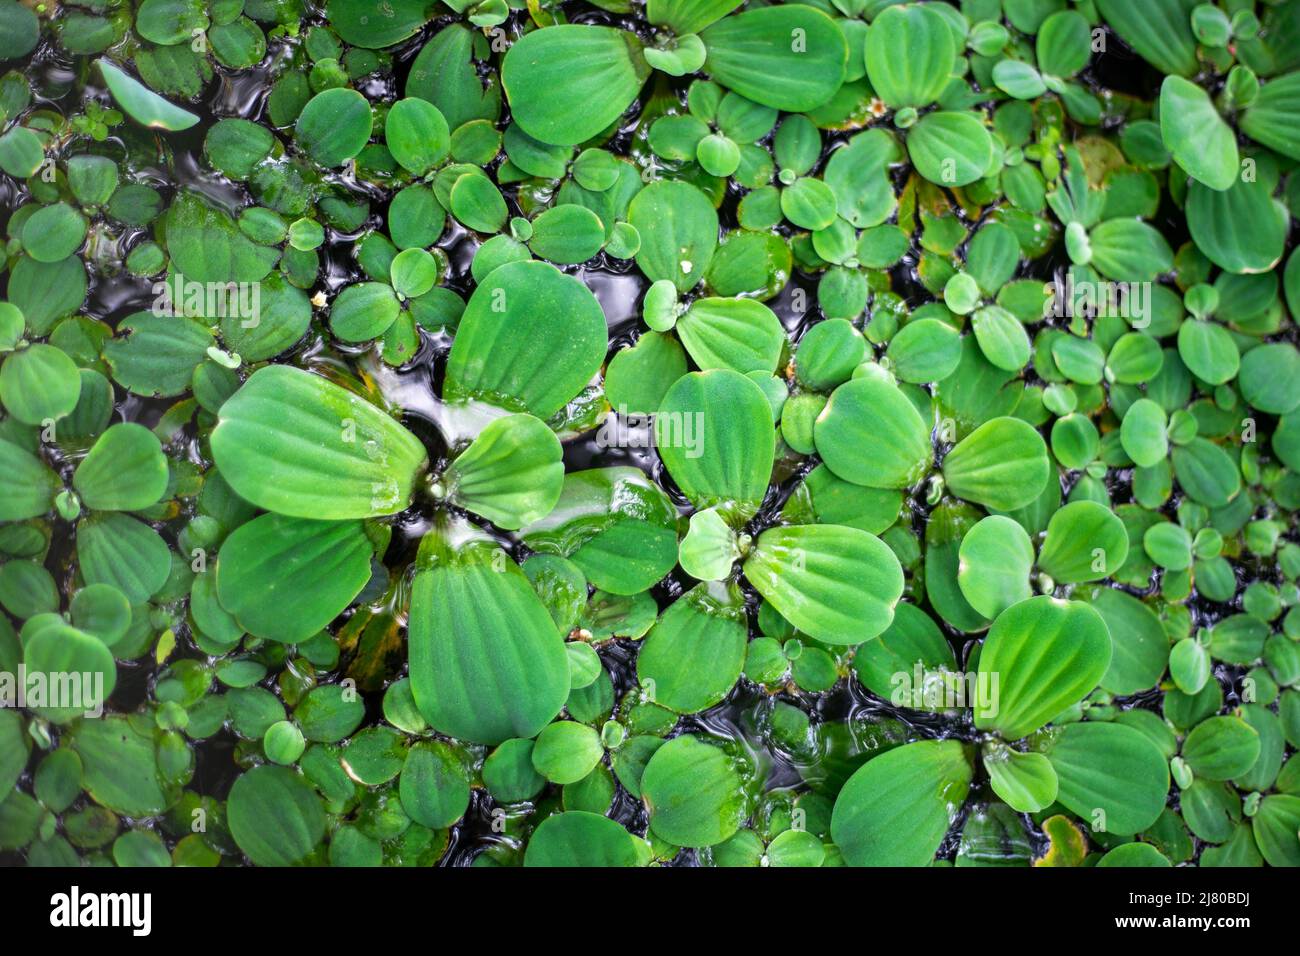 Aquatic green plant with small thick leaves. Floral background. Stock Photo